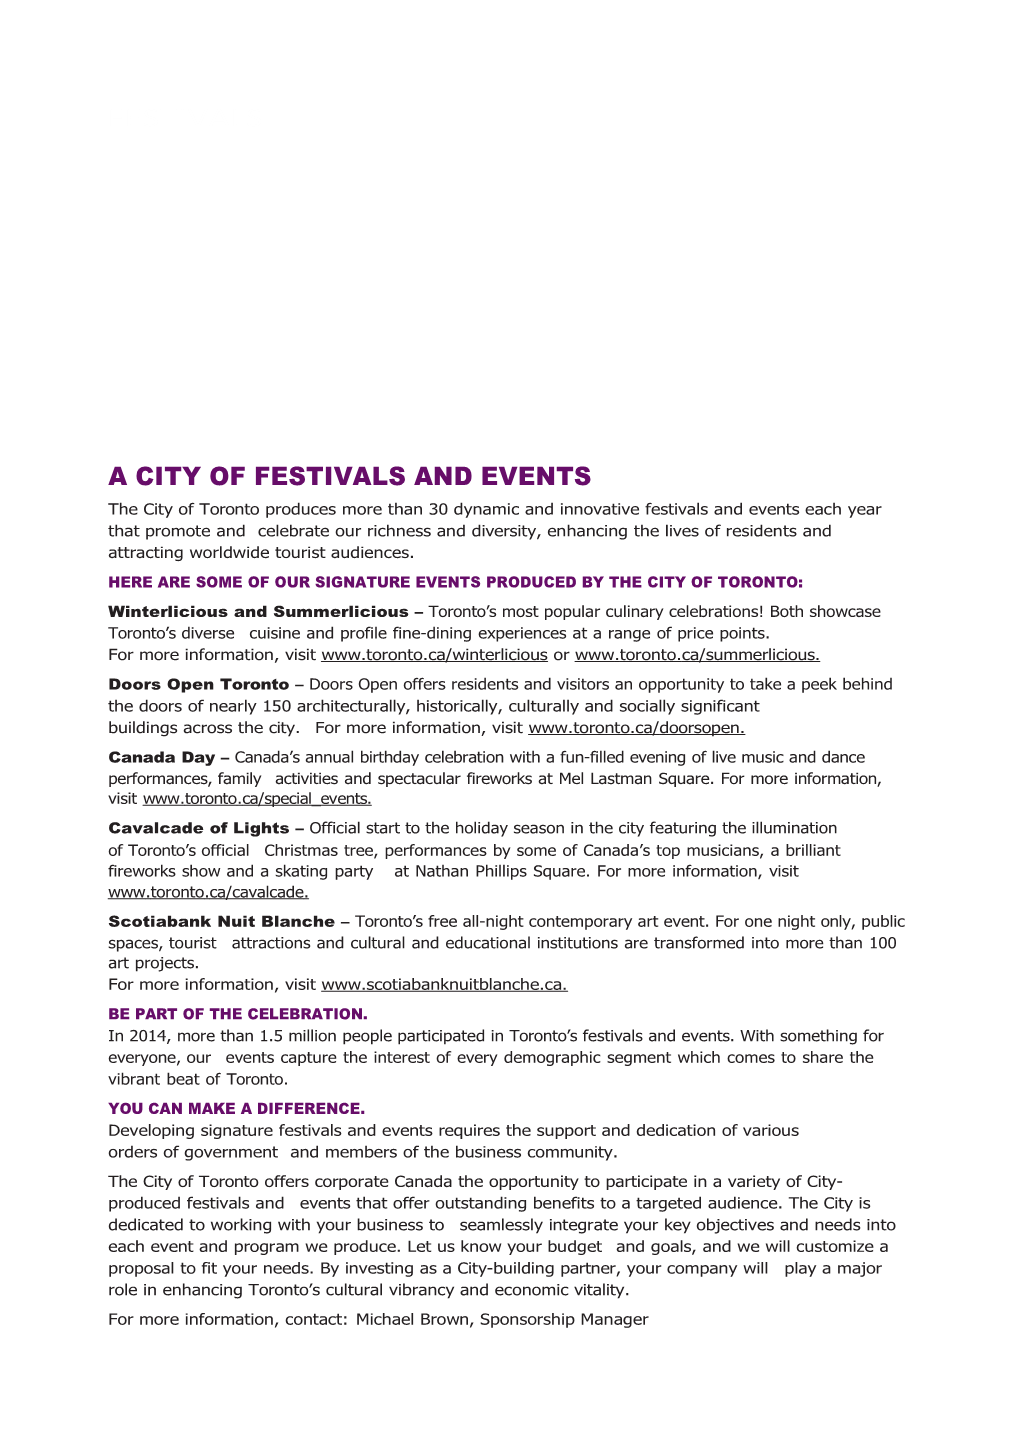 A City of Festivals and Events